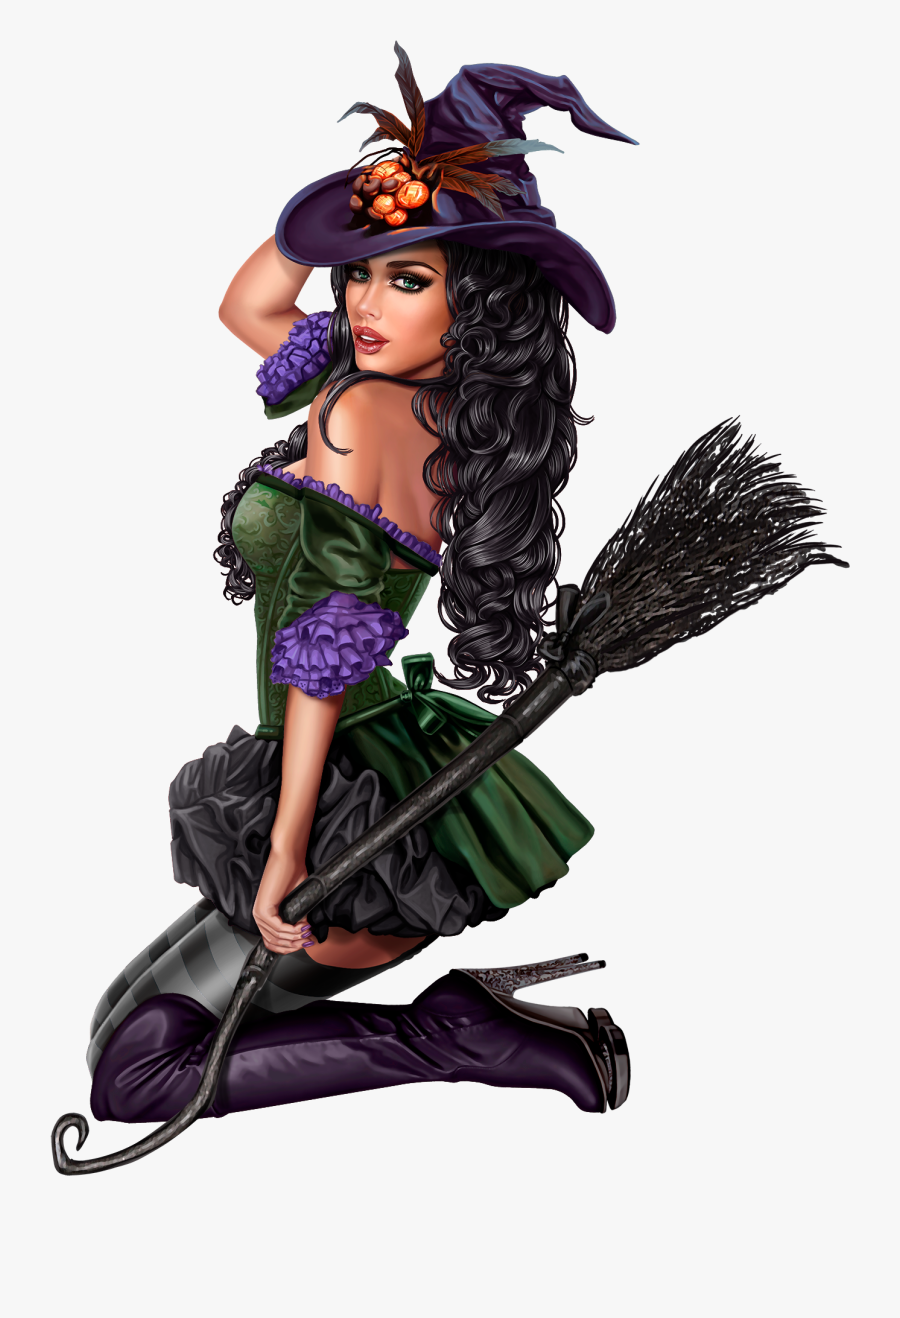 Woman Witch Png, Transparent Clipart